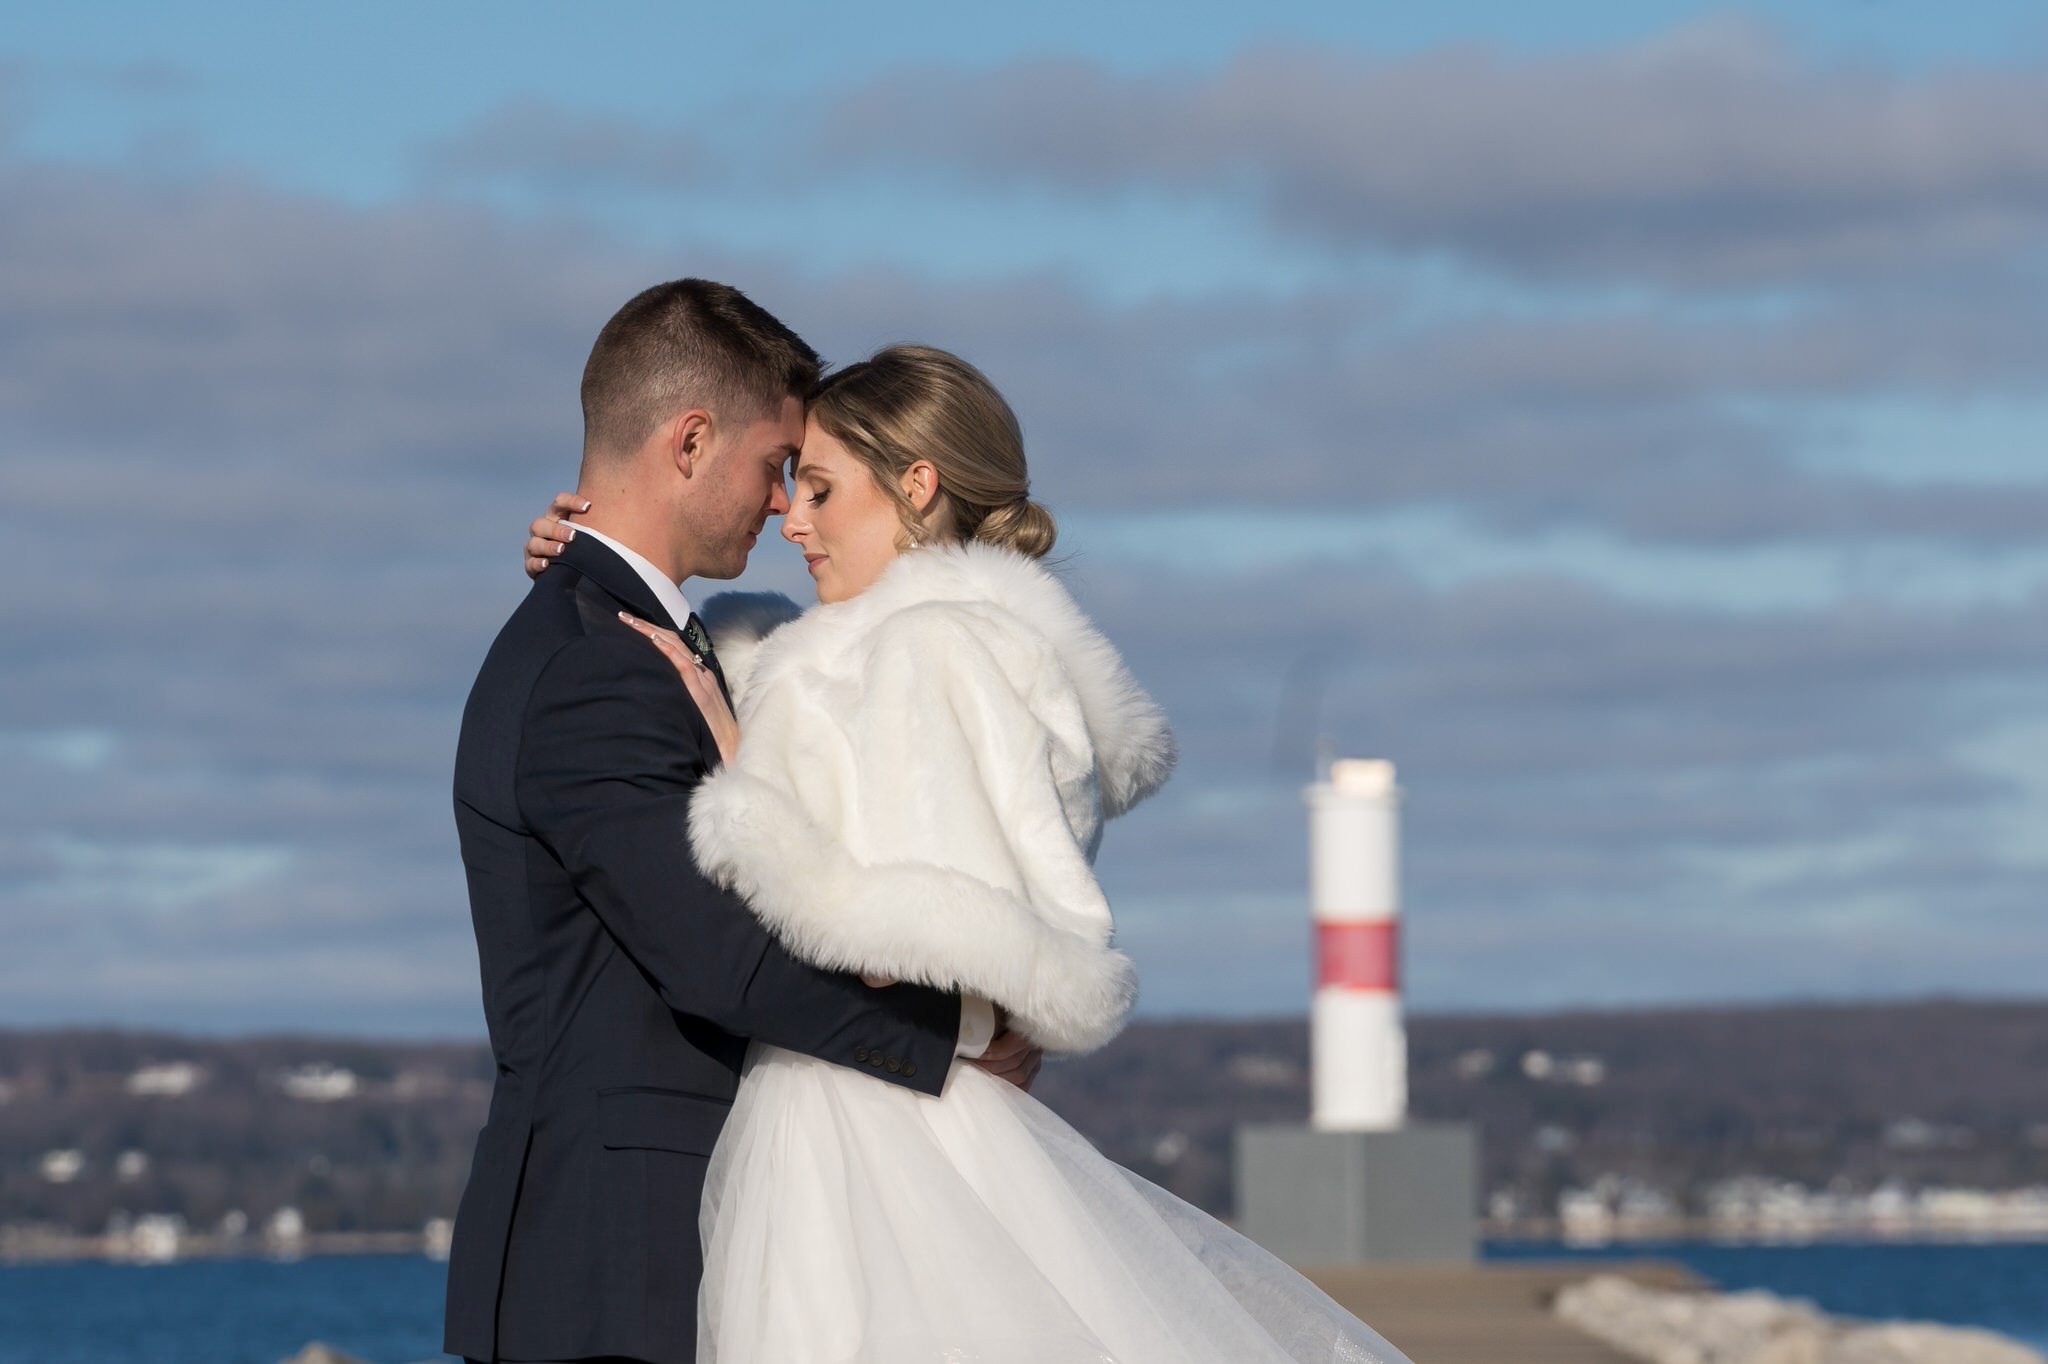 A bride and groom nuzzle near the Petoskey Pierhead Lighthouse before their Bay Harbor wedding ceremony.  